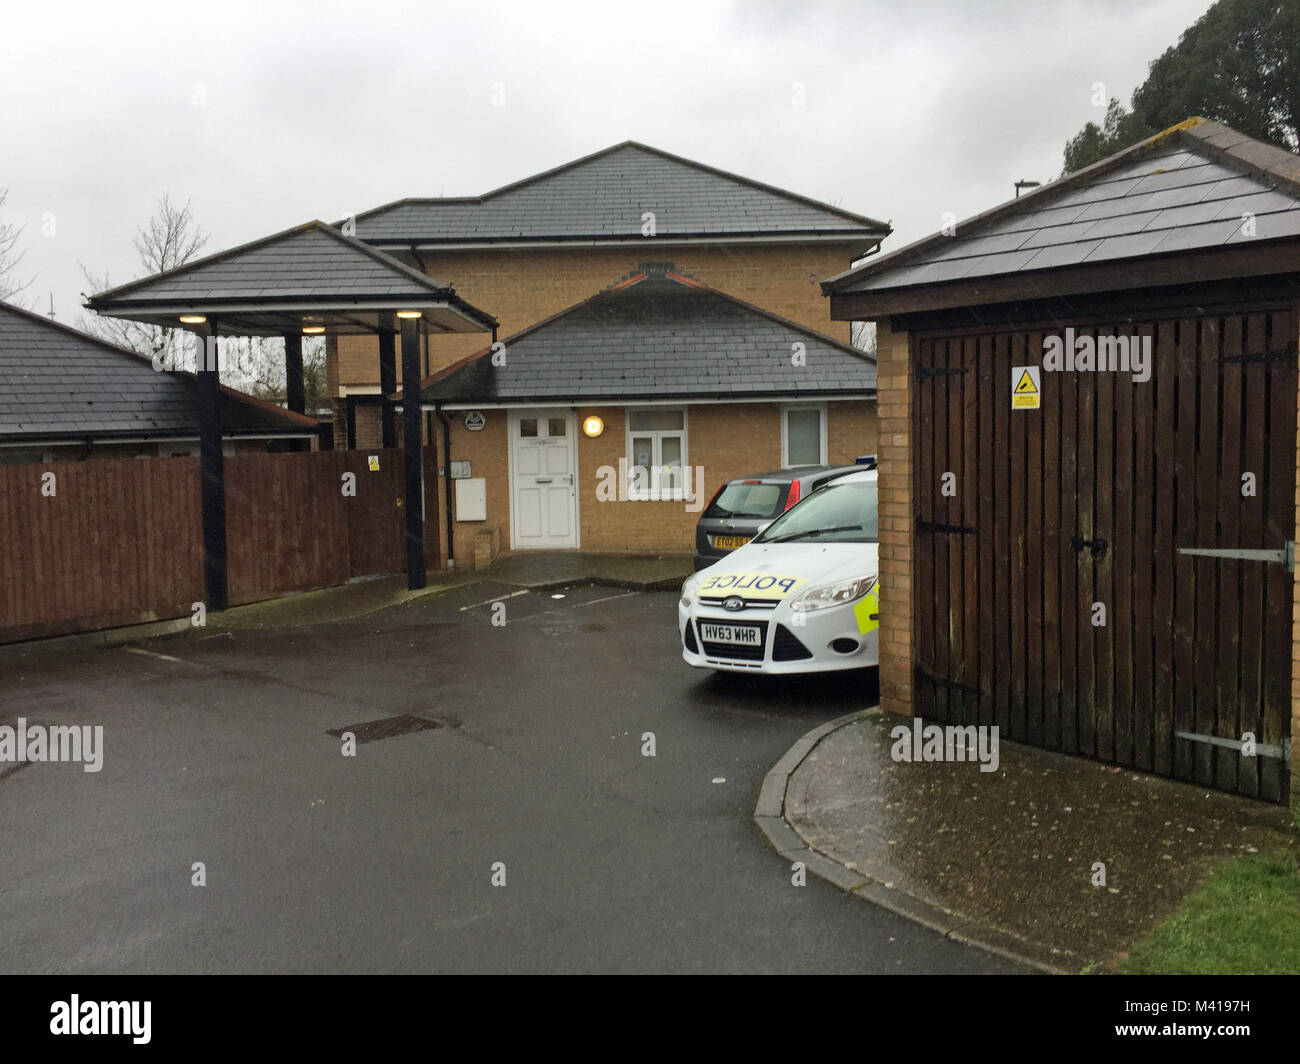 A police car outside a property in Defender Road, Southampton, where a six-week-old baby whose death is being treated by police as murder was taken ill. The property is a unit for young mothers and their children, according to neighbours. Stock Photo